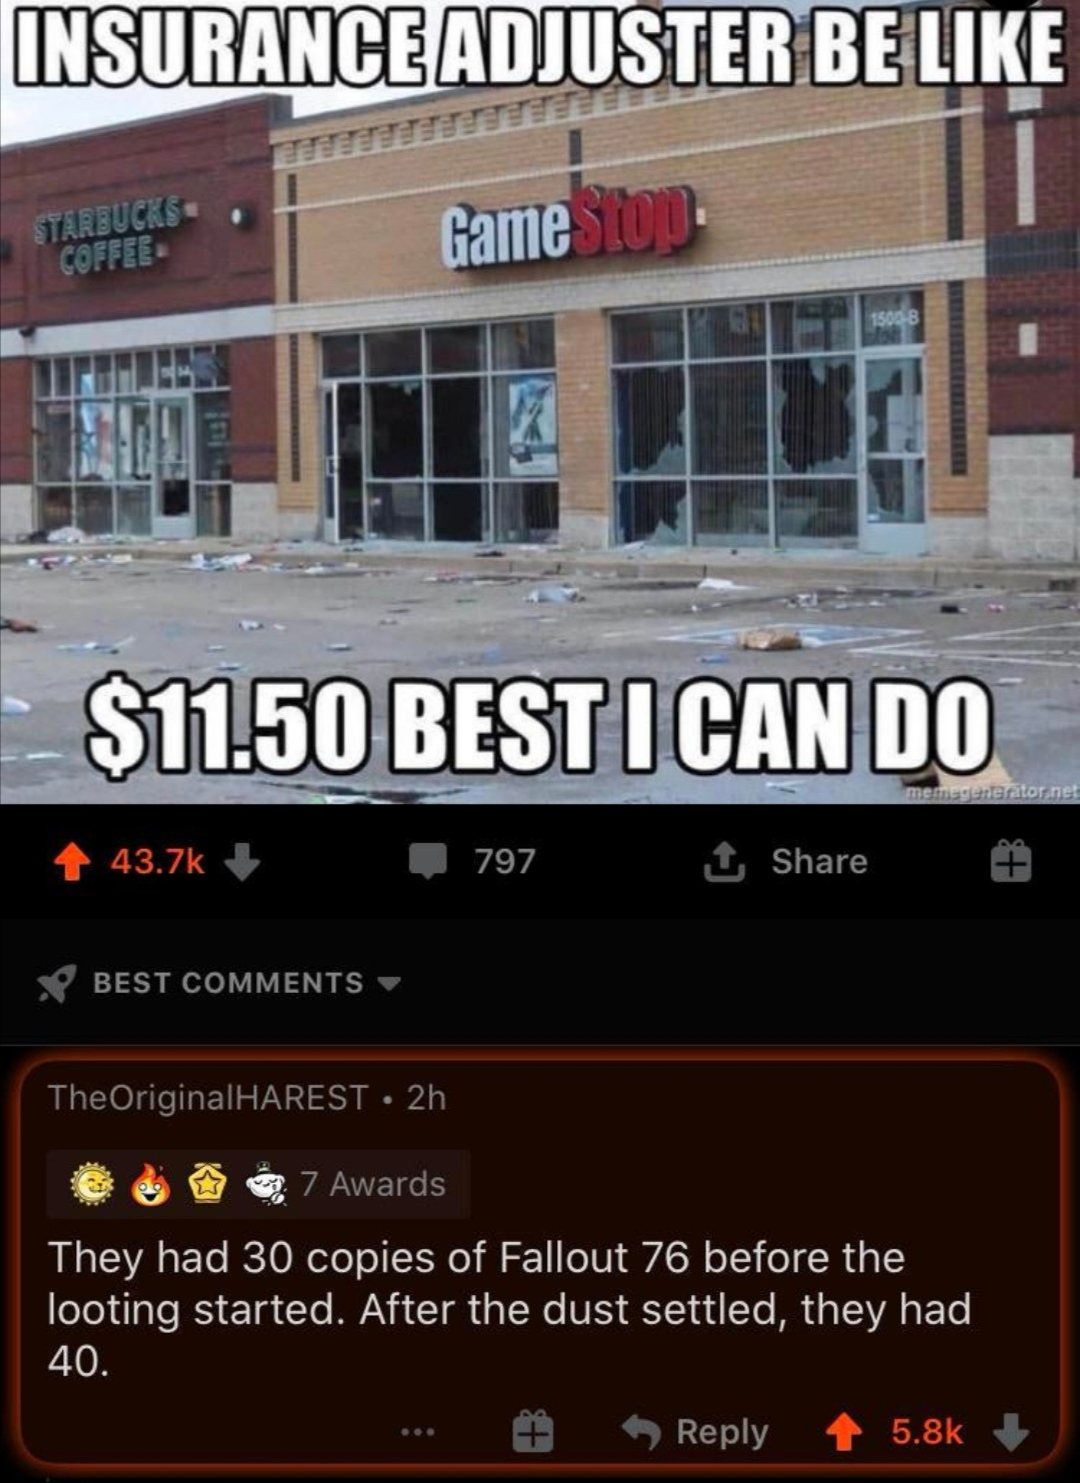 Insurance Adjuster Be like $11.50 Best I Can Do Gamestop - They had 30 copies of Fallout 76 before the looting started. After the dust settled, they had 40.